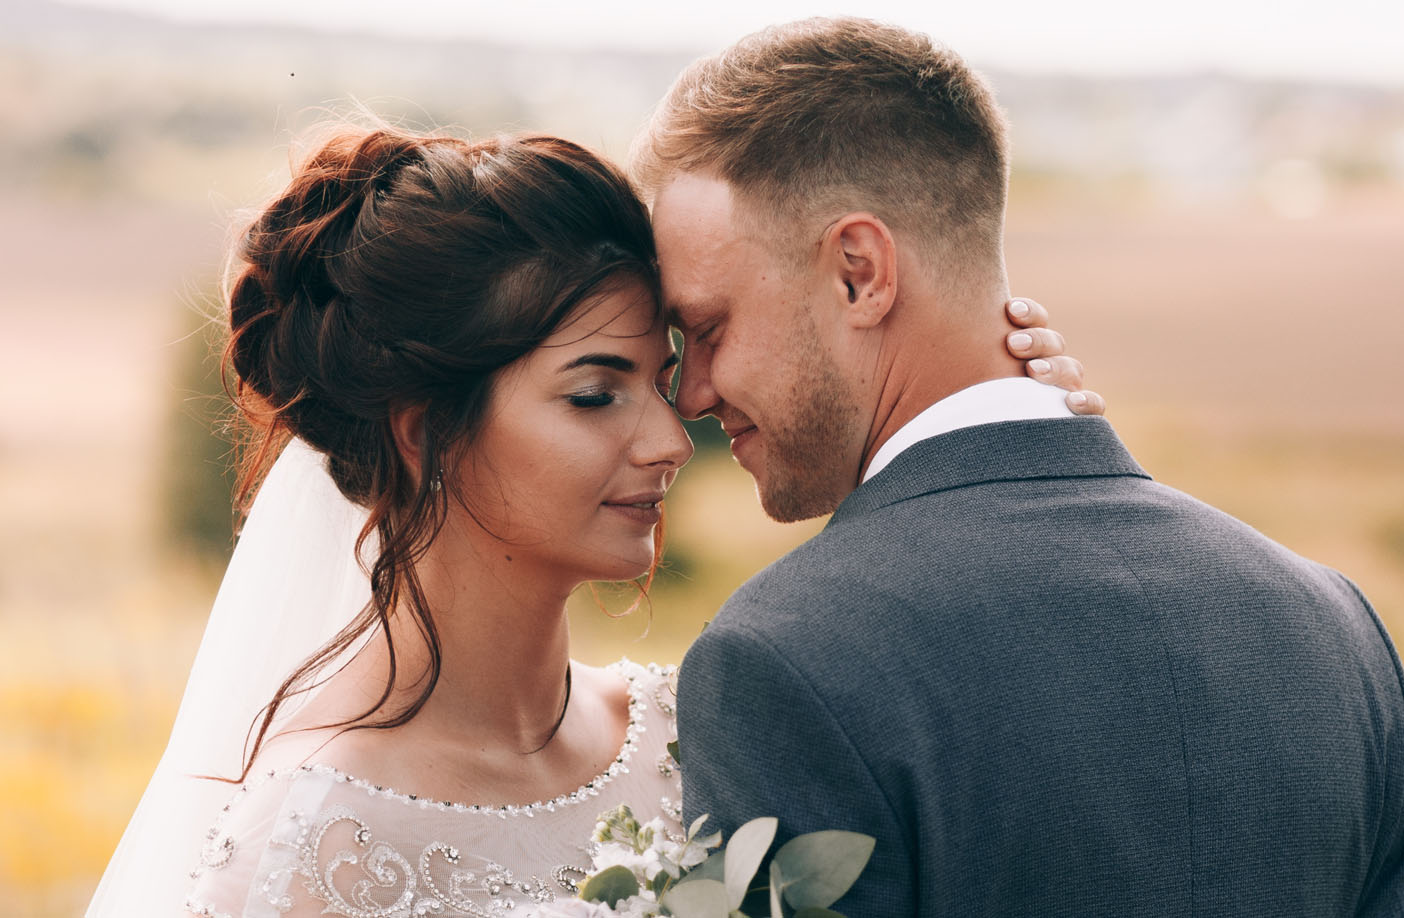 New study sheds light on how premarital factors influence the sex lives of newly-wed couples image